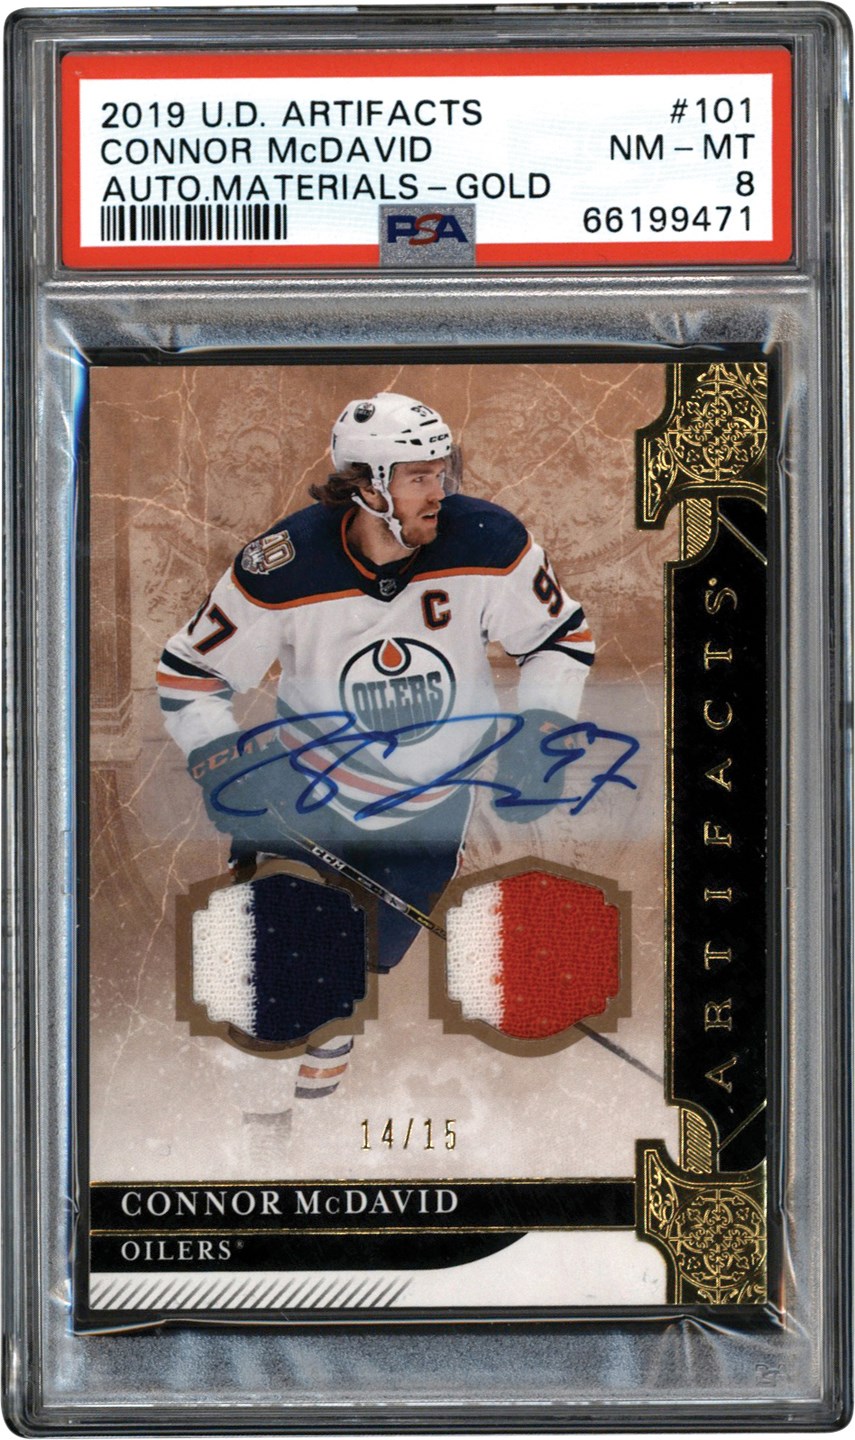 Hockey Cards - 2019-2020 Upper Deck Artifacts Auto Materials Gold #101 Connor McDavid Dual Game Used Patch Autograph #14/15 PSA NM-MT 8 (Pop 1 of 1 Highest Graded)